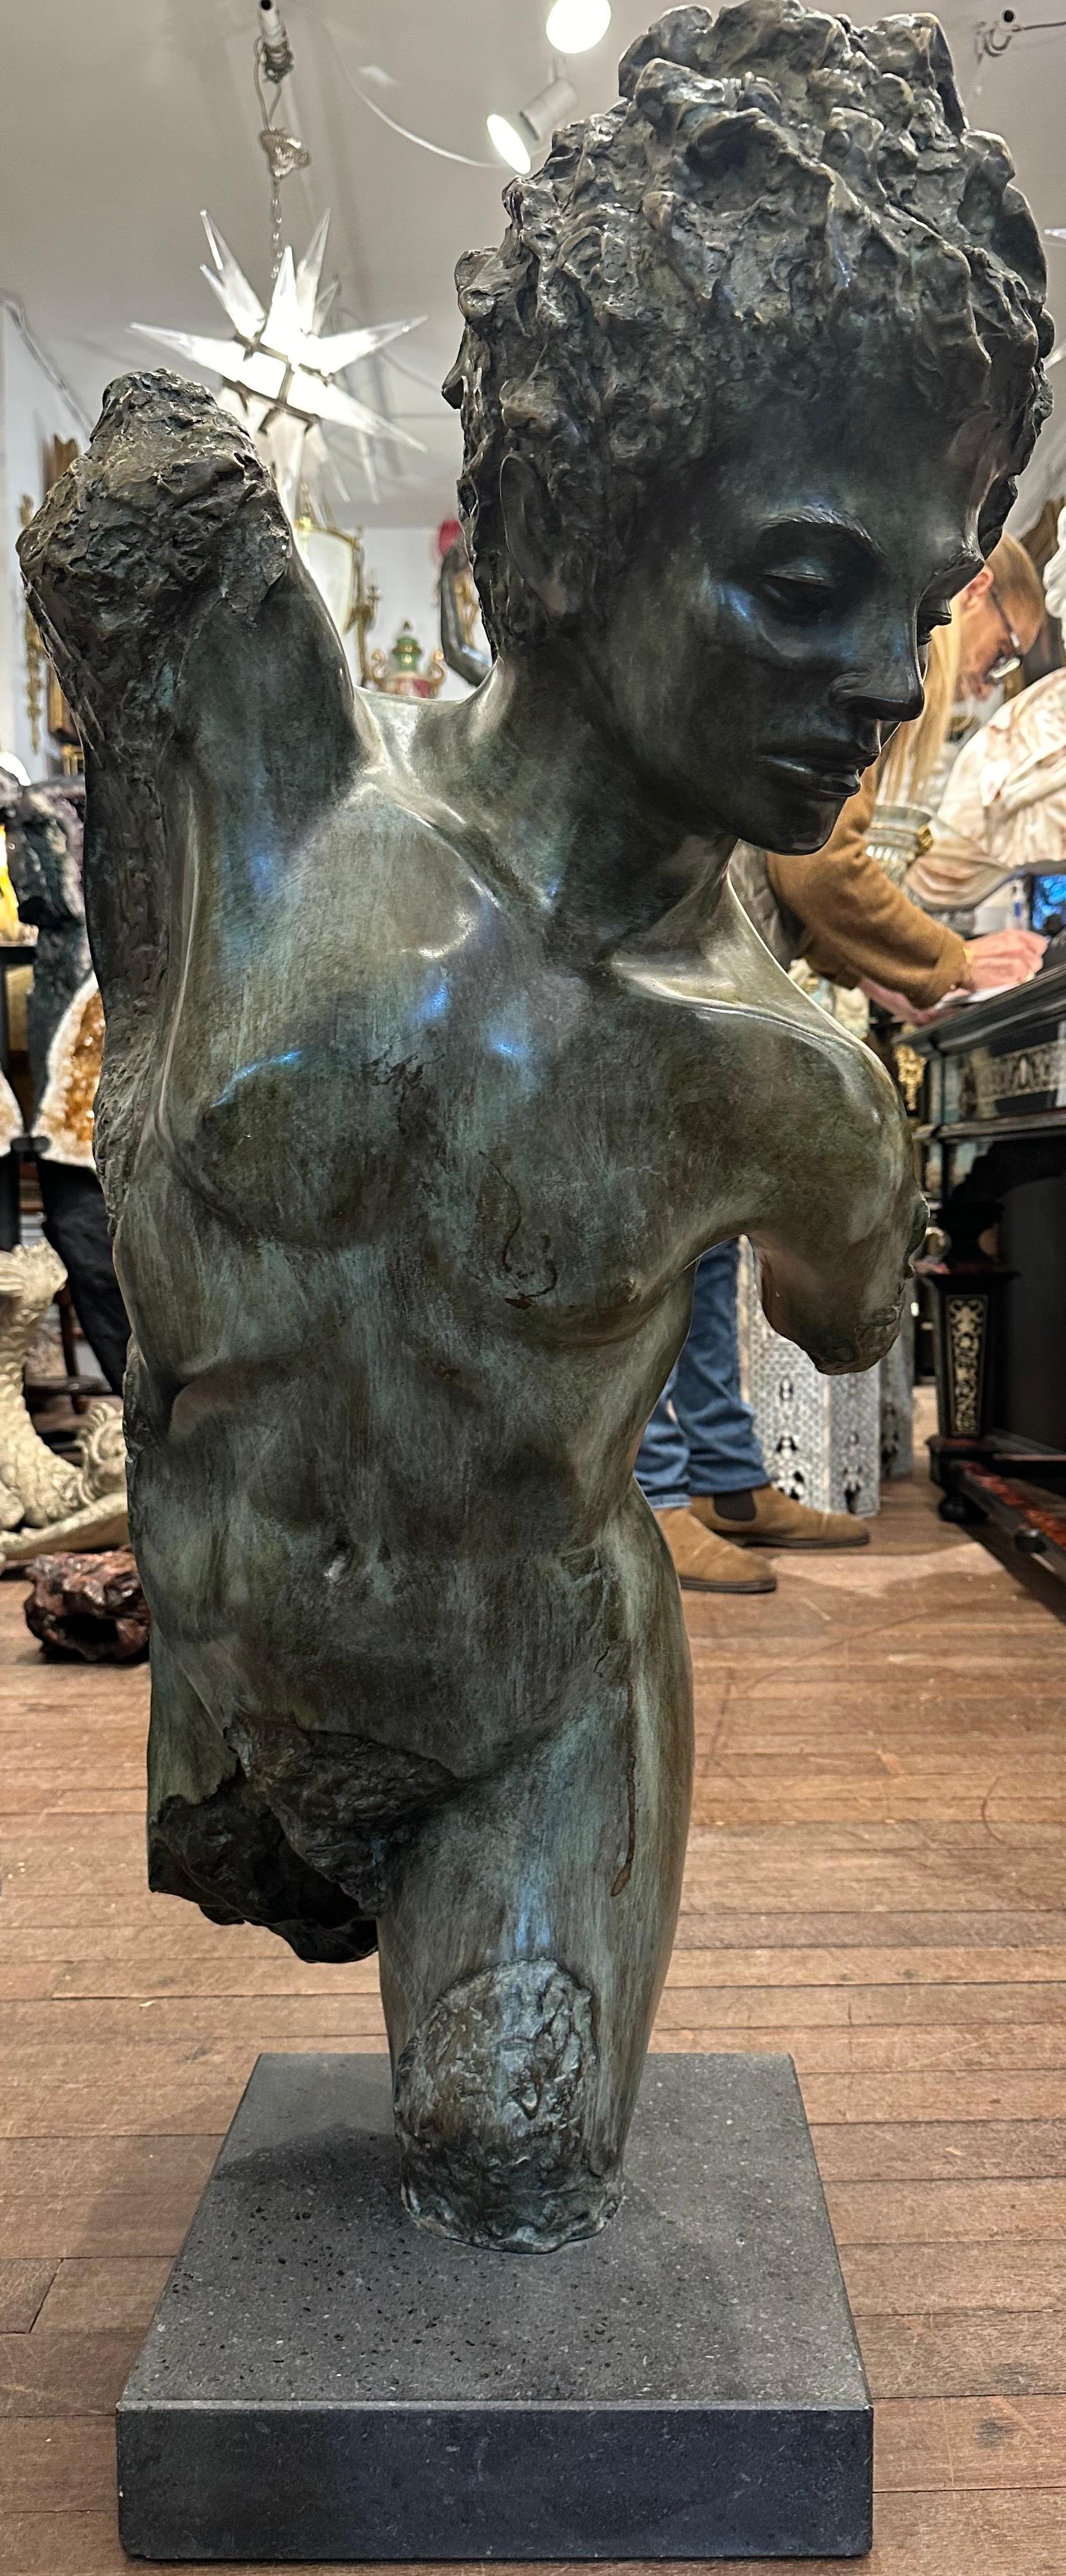 A attractive, stylised bronze casting of a male torso, on a black marble base.The face is detailed and skilfully done. The male torso is part polished and part textured with a decorative aged verdigris patina. The ruffled hair contrasts against the